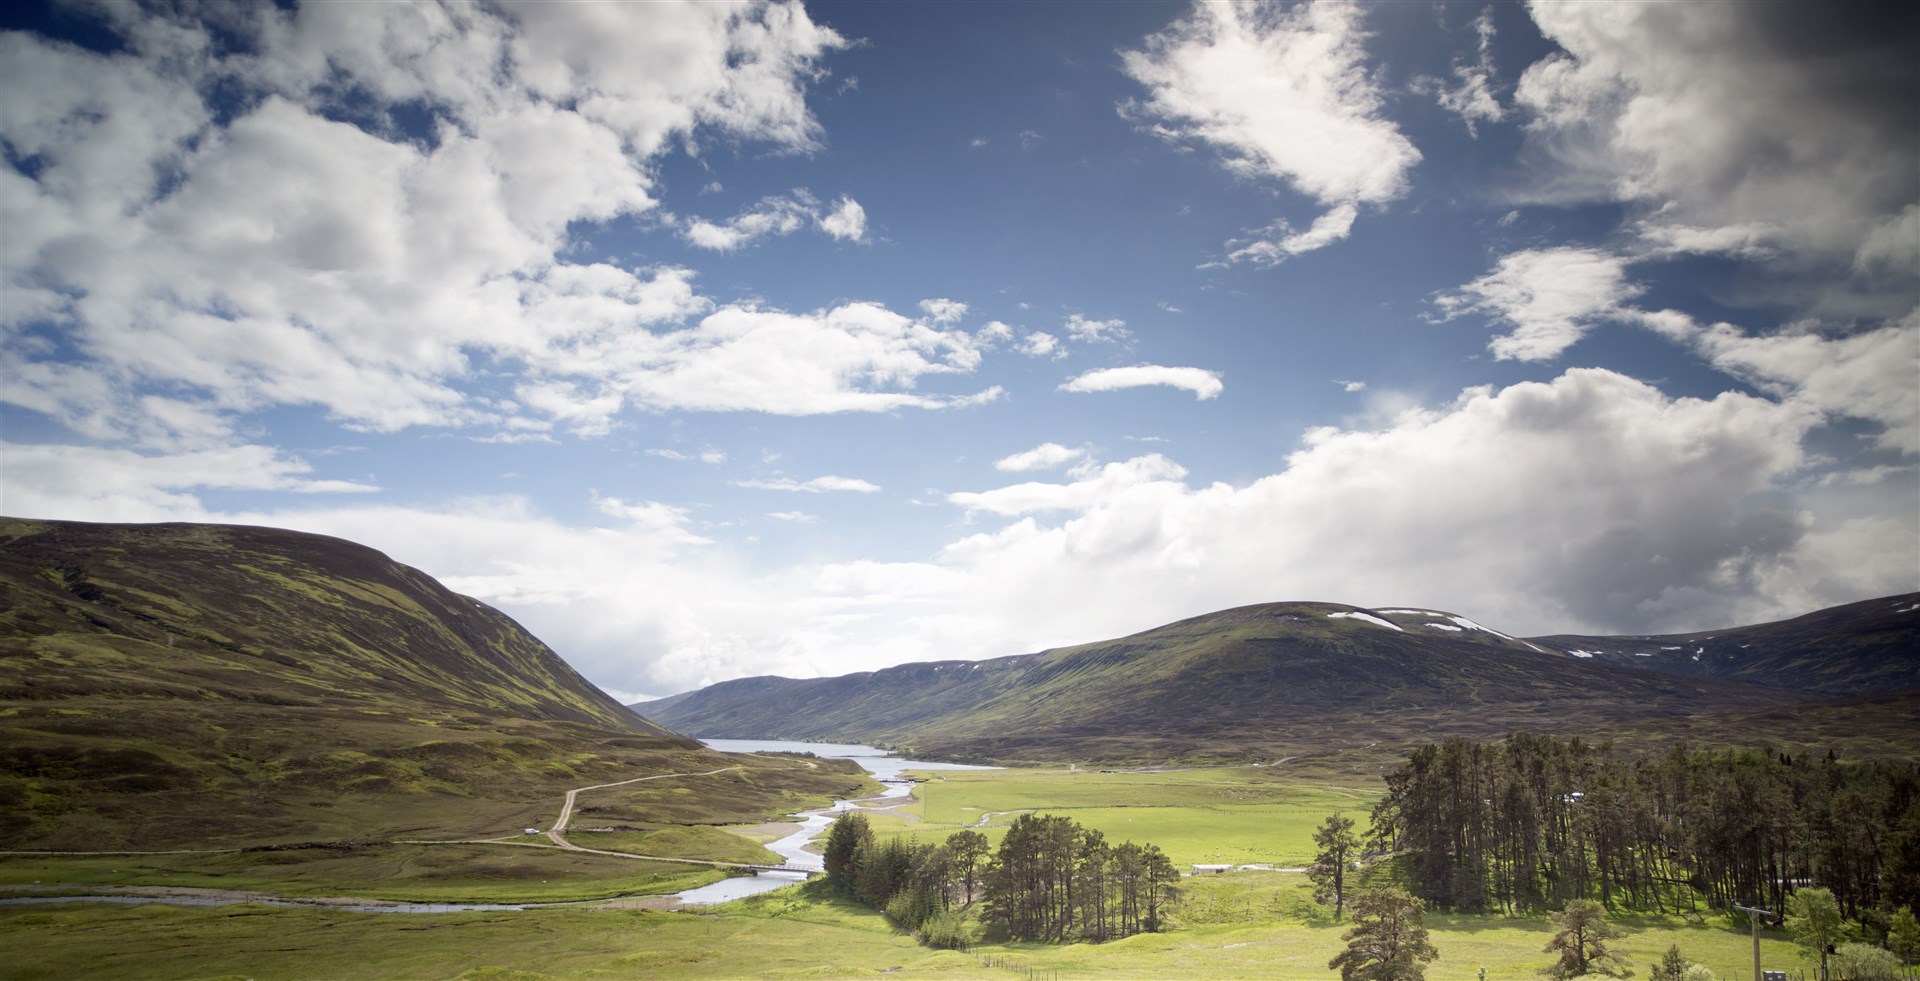 Travellers on the Royal Scotsman trips to the region are able to enjoy stunning views of lochs and mountains.